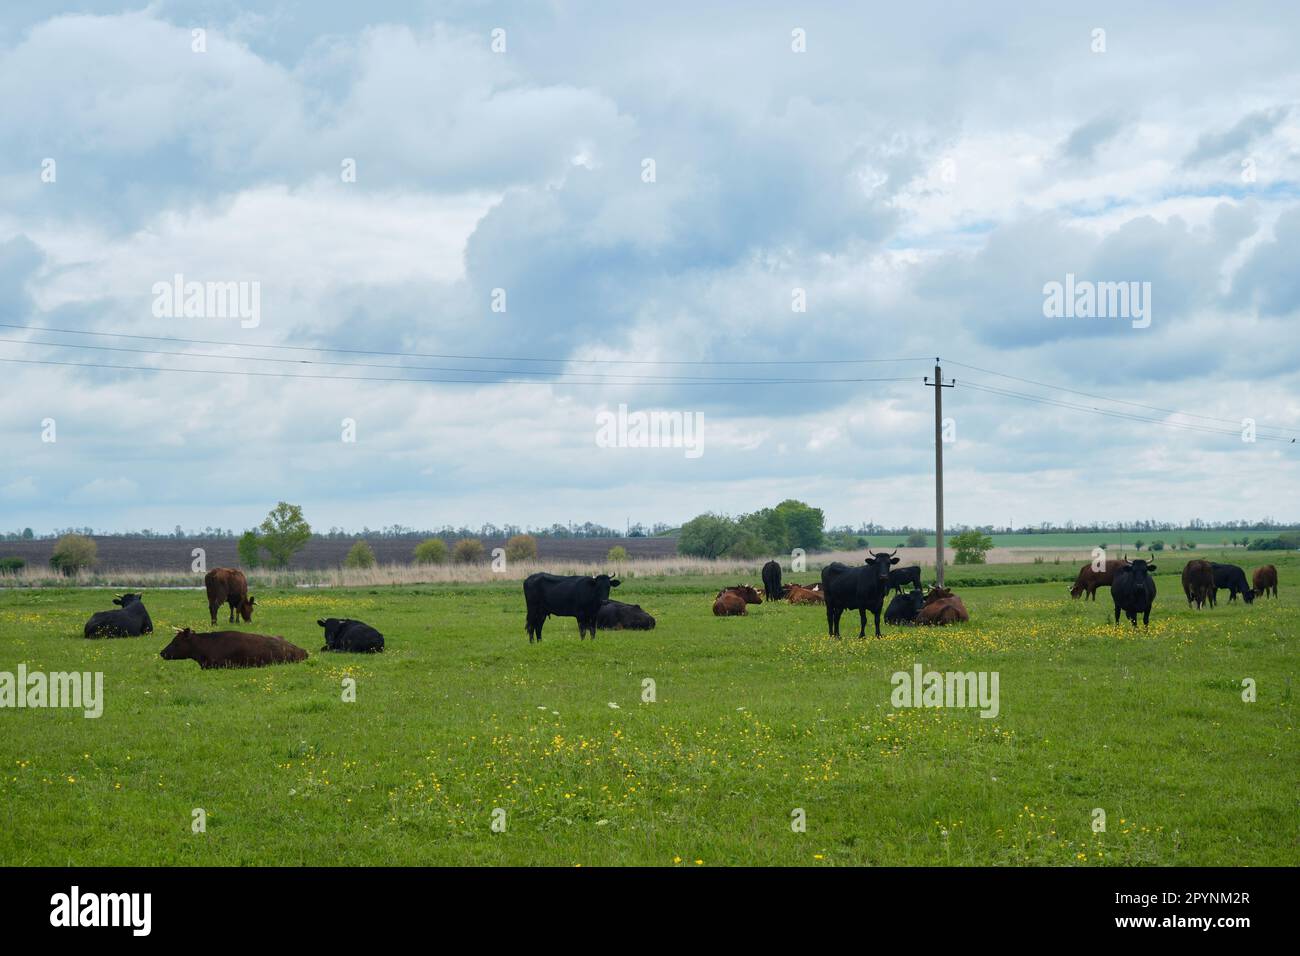 Agriculture industry concept. Farm purebred animals group of cattle walk and sleep in grass among yellow flowers in spring. Herd of cows graze in gree Stock Photo